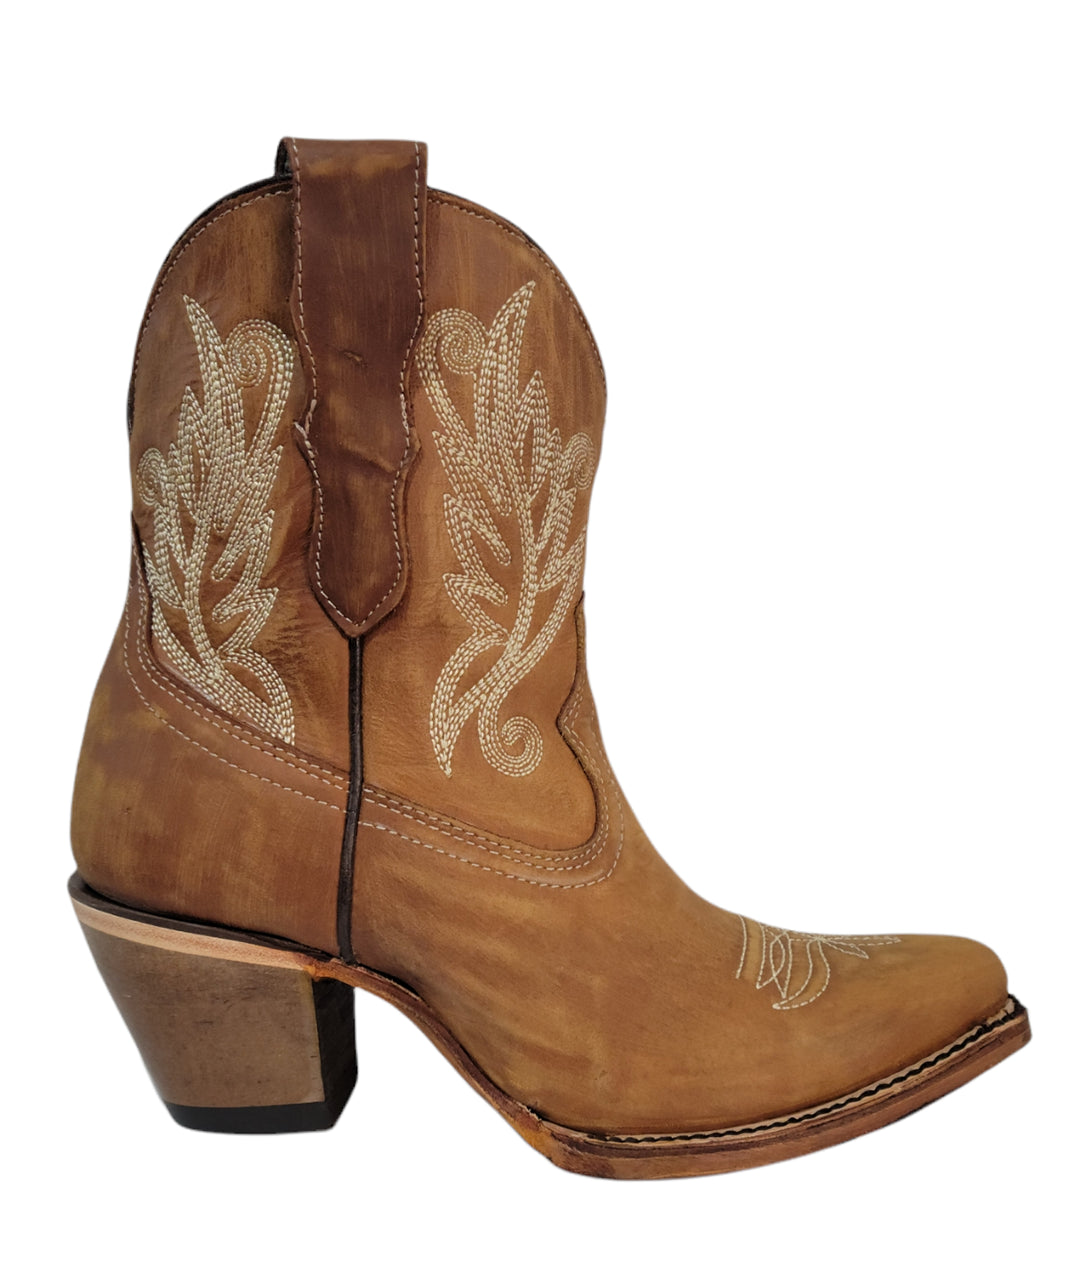 Corral LD Golden Embroidery Ankle Boot